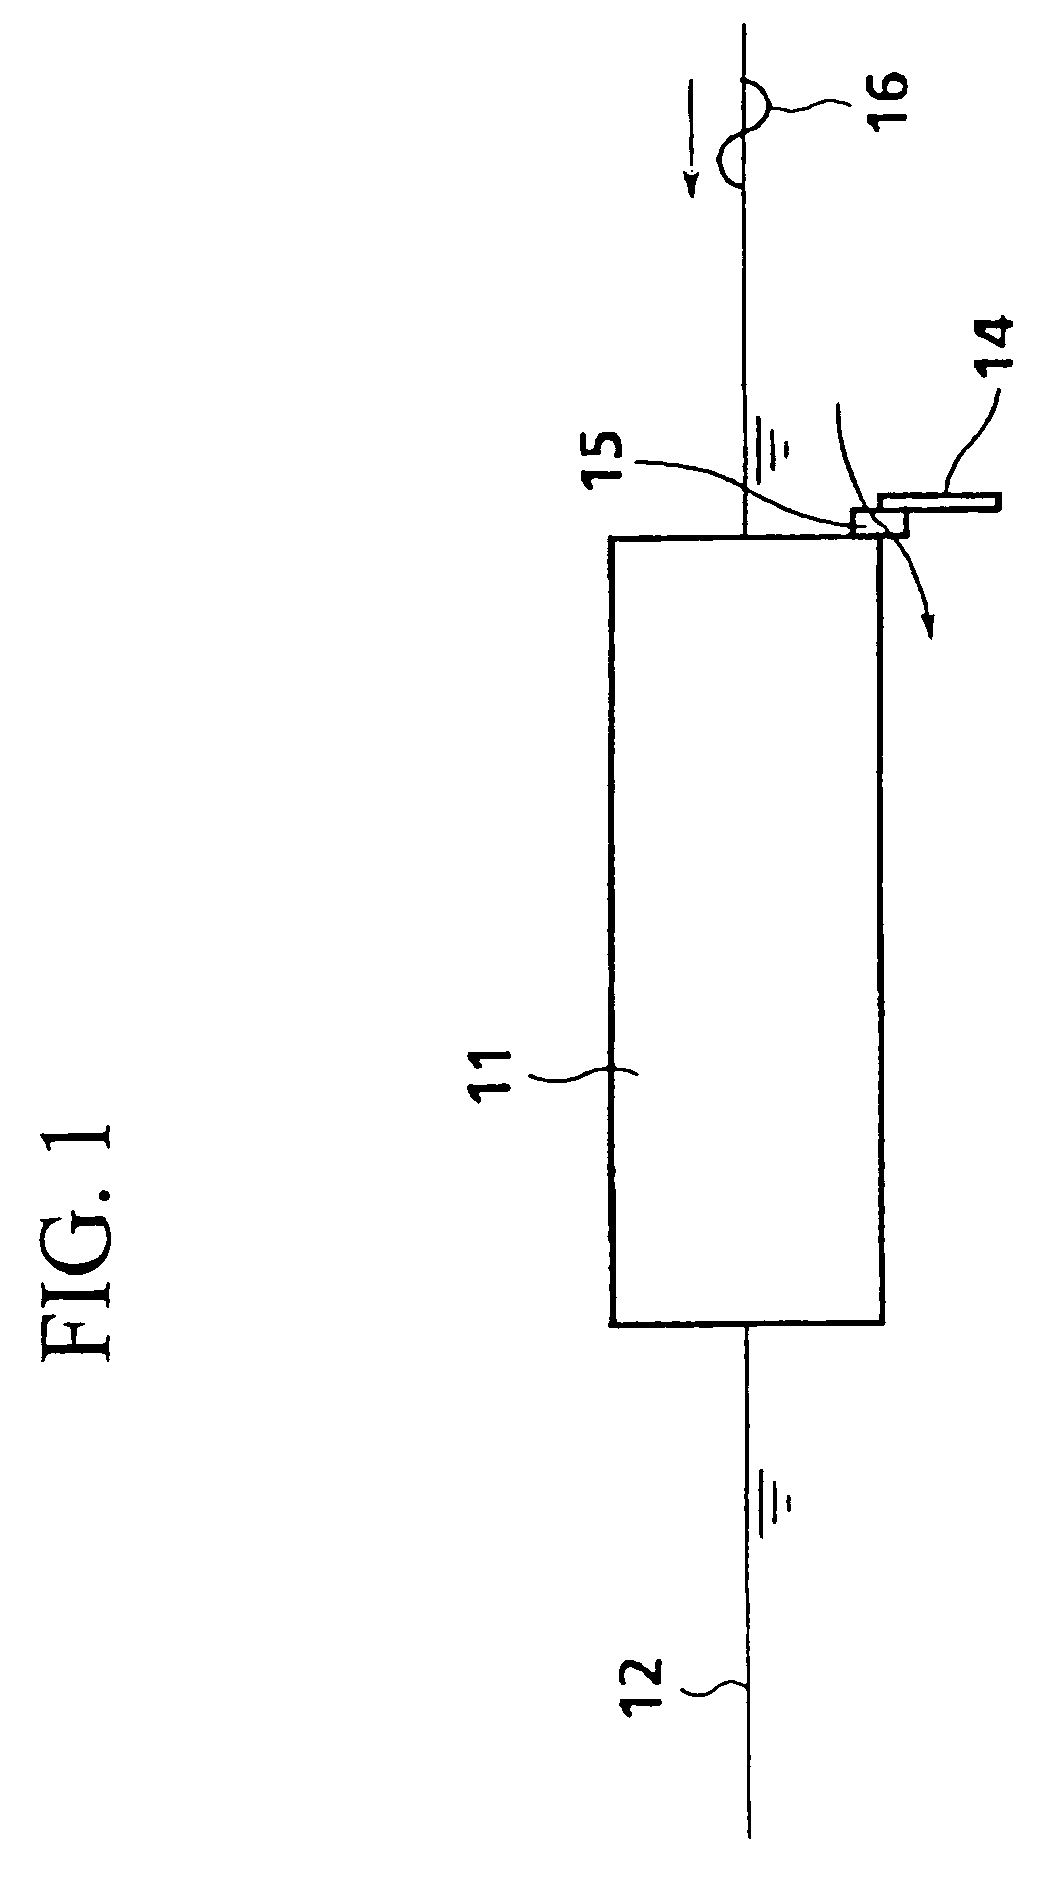 Motion reduction apparatus and floating body therewith